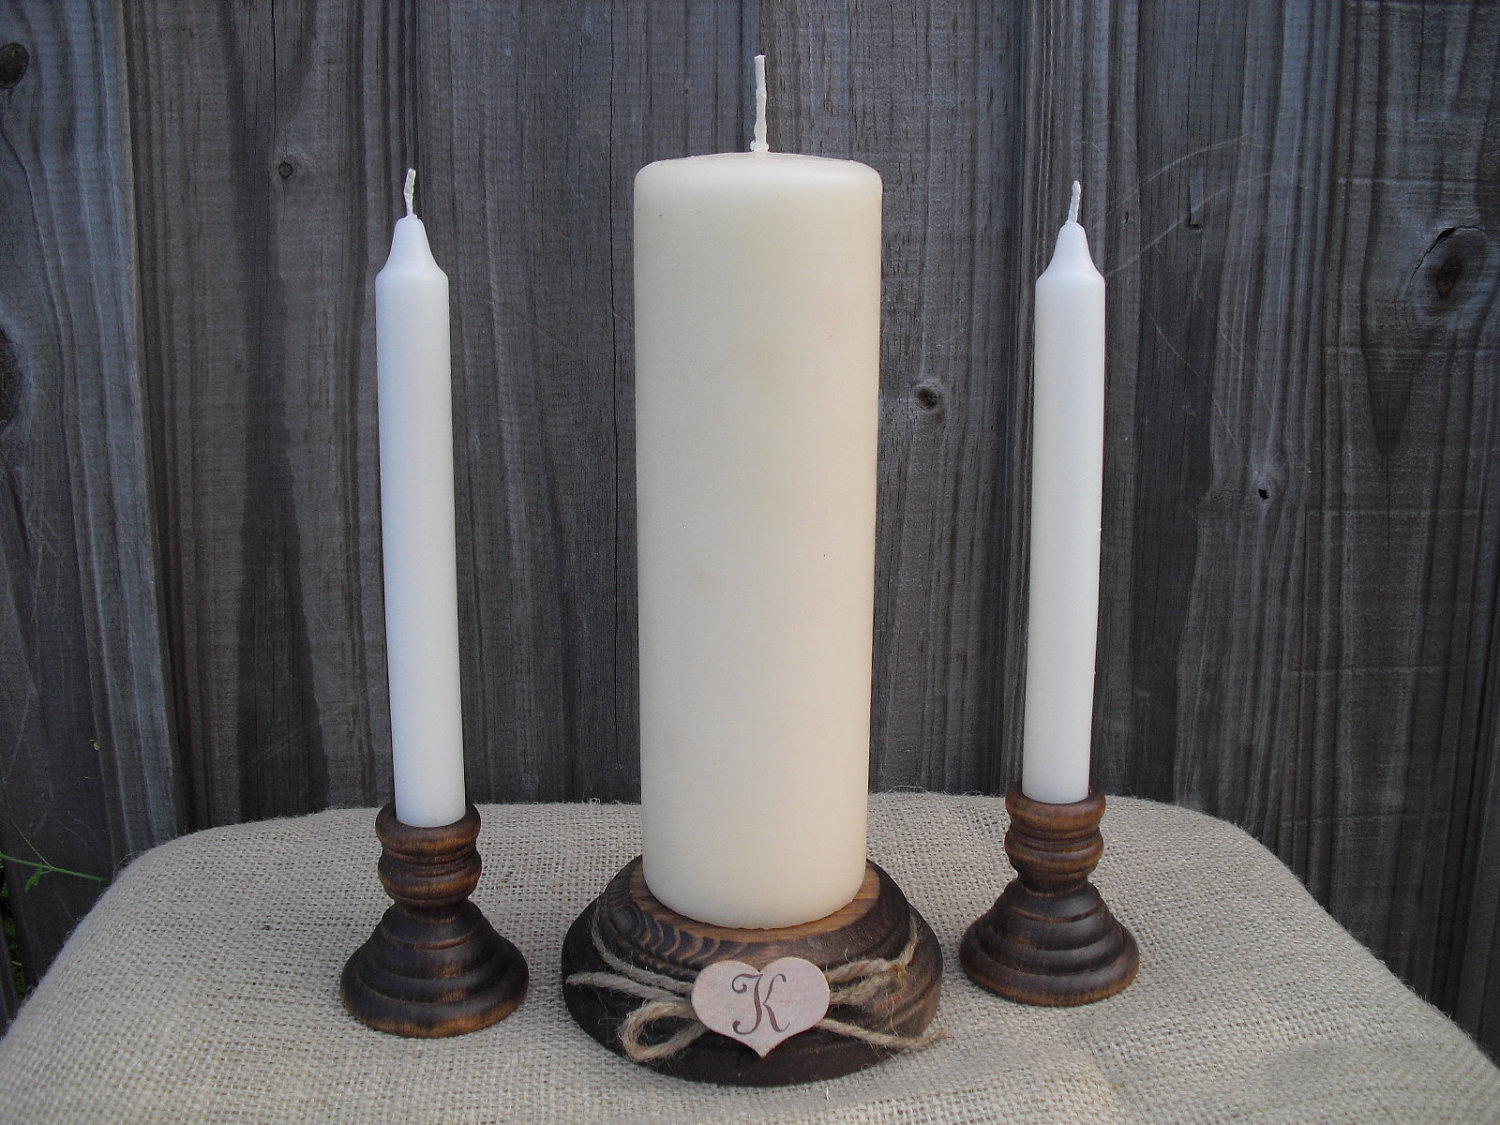 Unity Candles Weddings | Dazzling Expressions | http://emmalinebride.com/rustic/unity-candles-weddings/